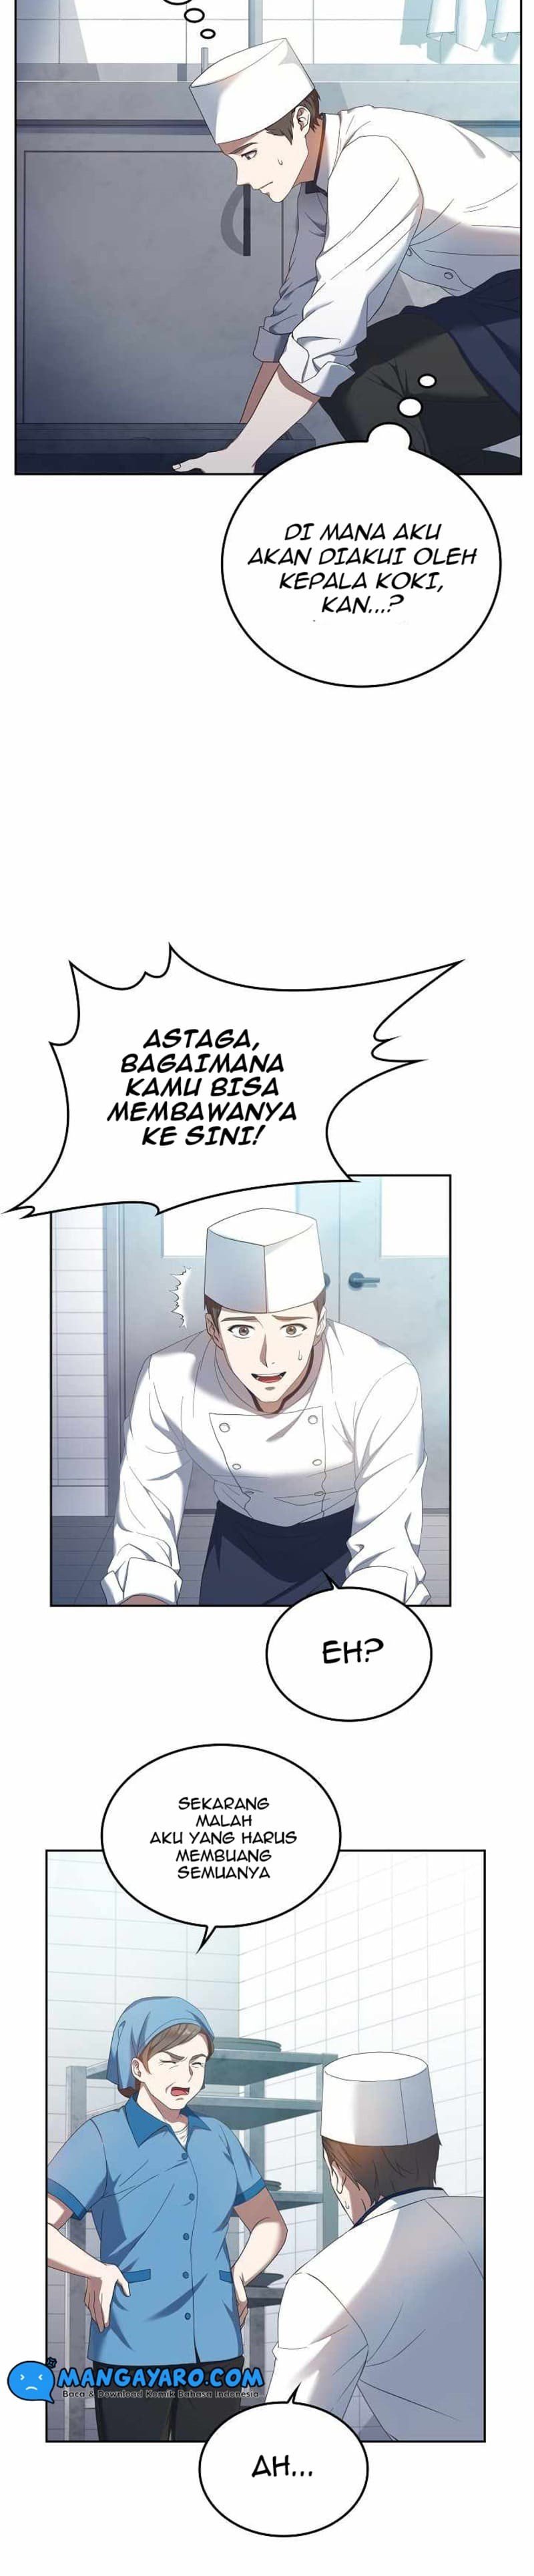 Baca Youngest Chef From the 3rd Rate Hotel Chapter 1  - GudangKomik